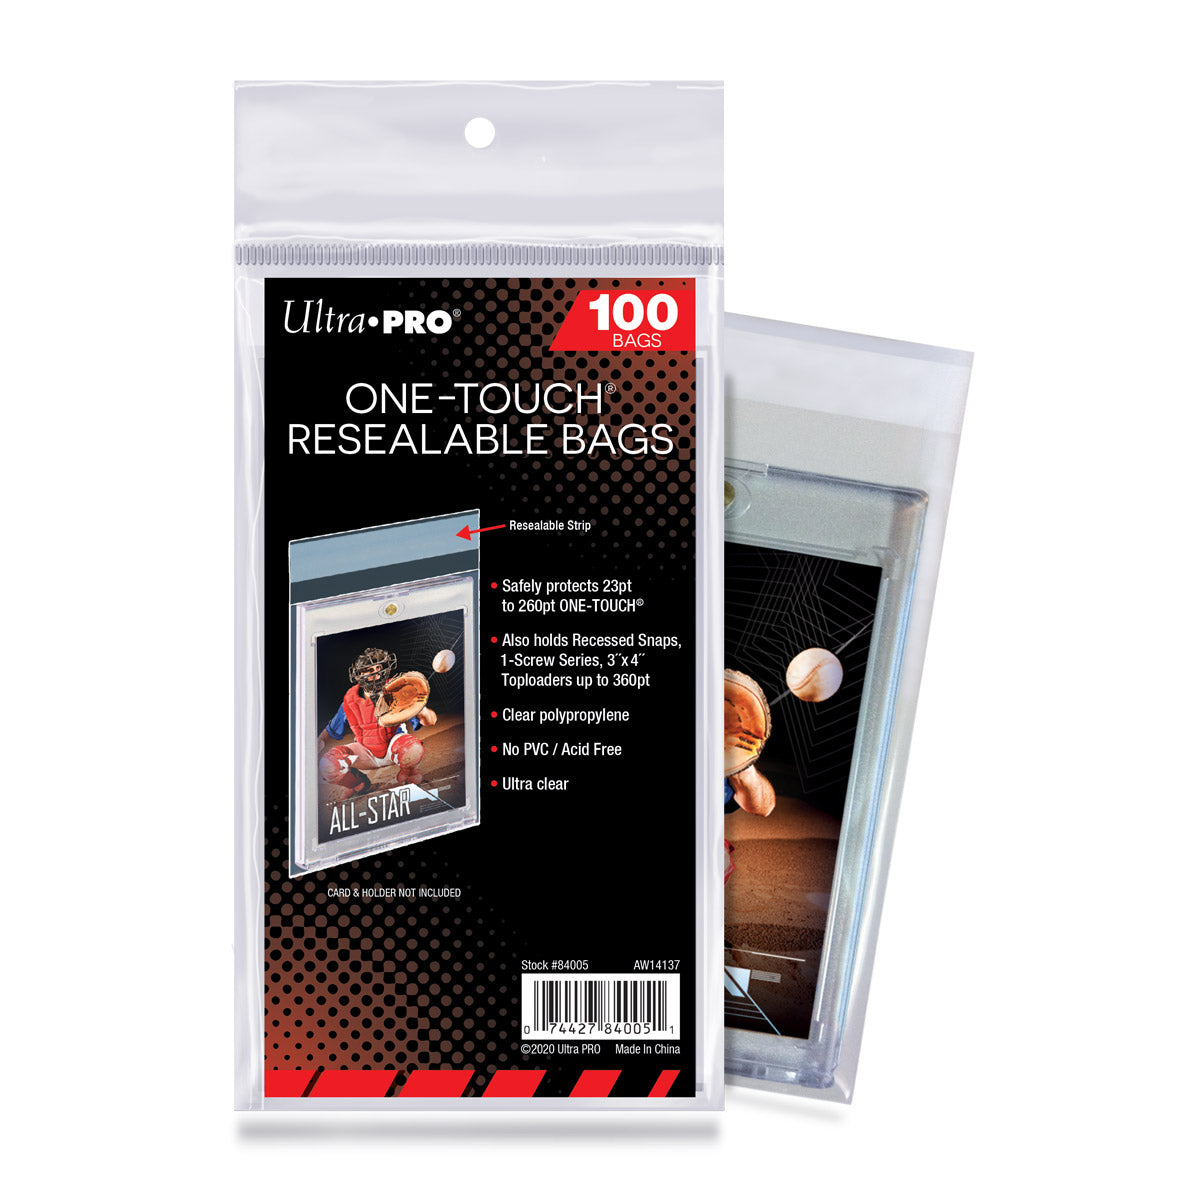 Ultra PRO: One-Touch Resealable Bags